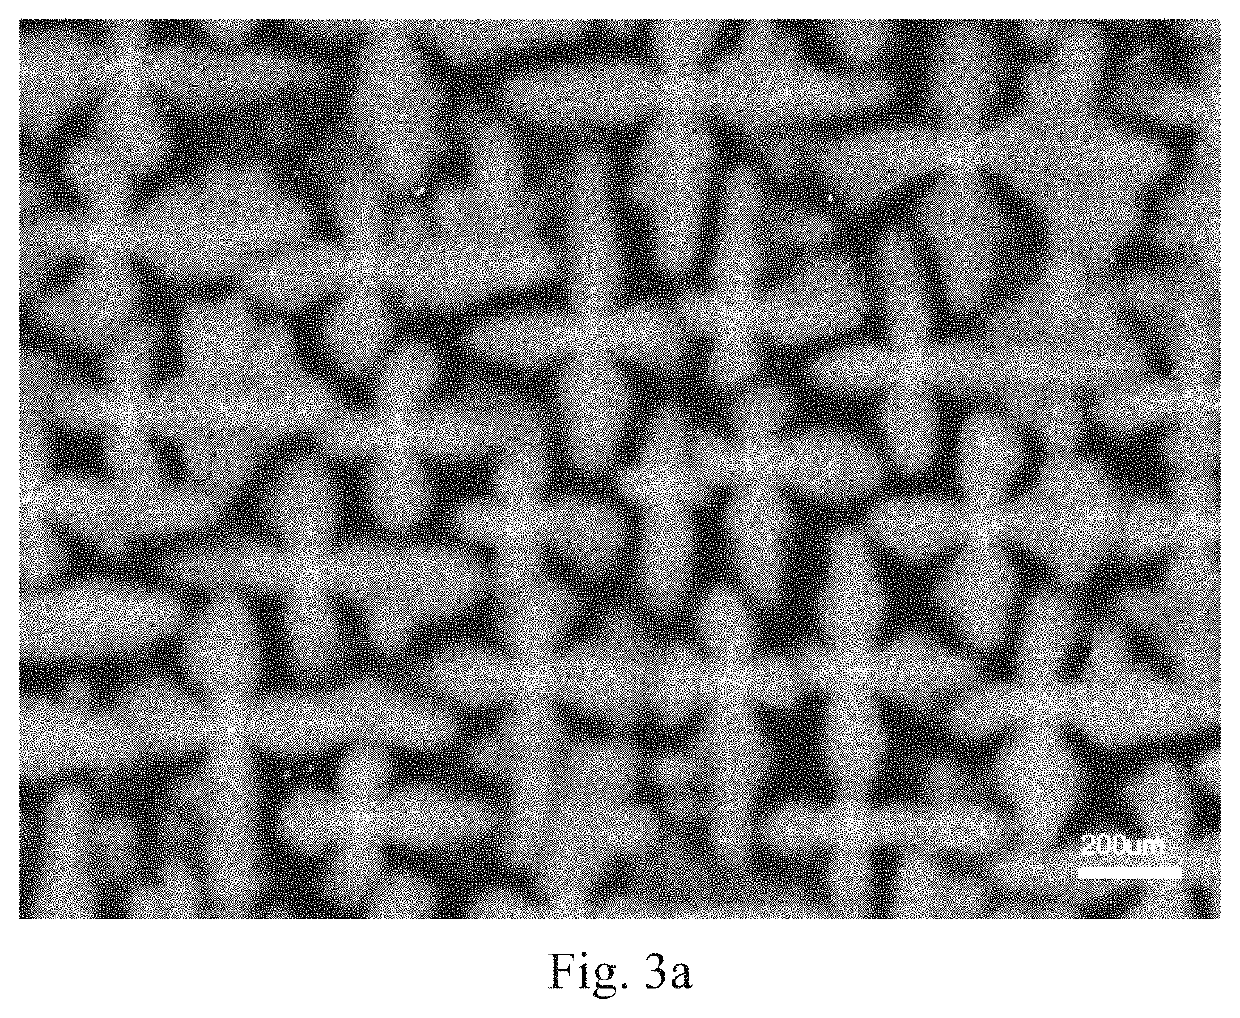 Method for automatic quantitative statistical distribution characterization of dendrite structures in a full view field of metal materials